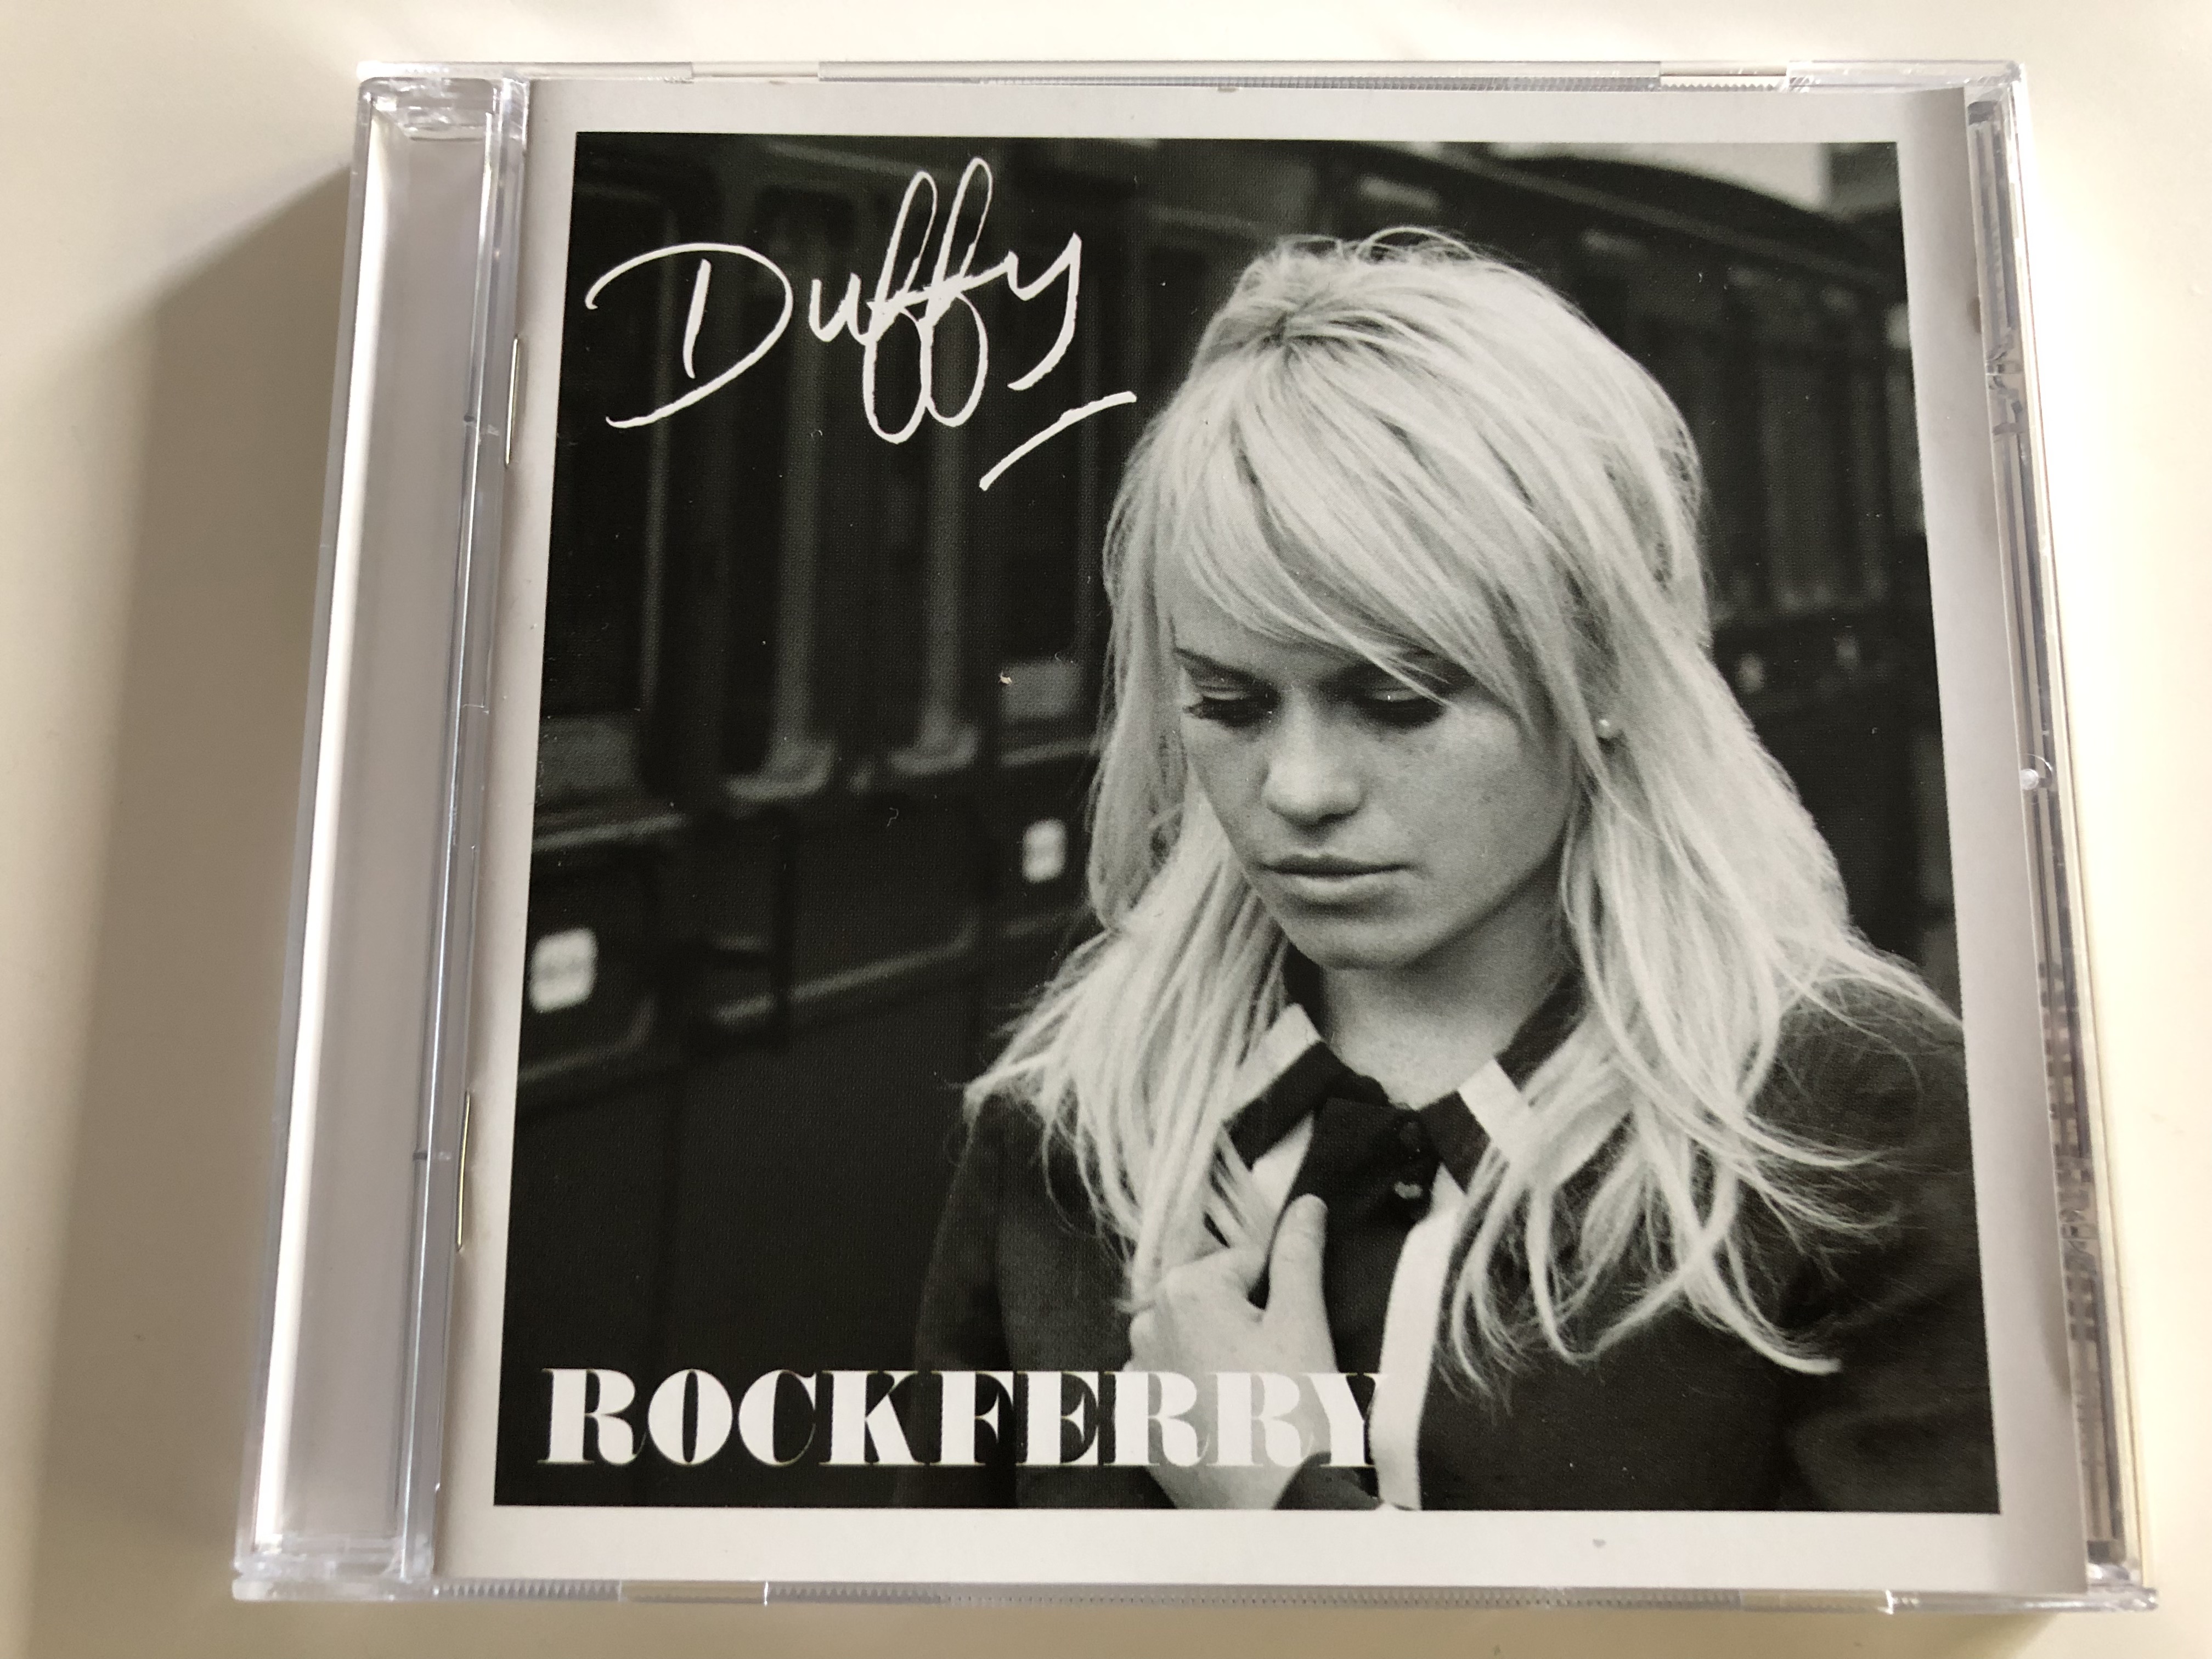 duffy-rockferry-serious-stepping-stone-mercy-distant-dreamer-audio-cd-2008-polydor-176297-5-1-.jpg